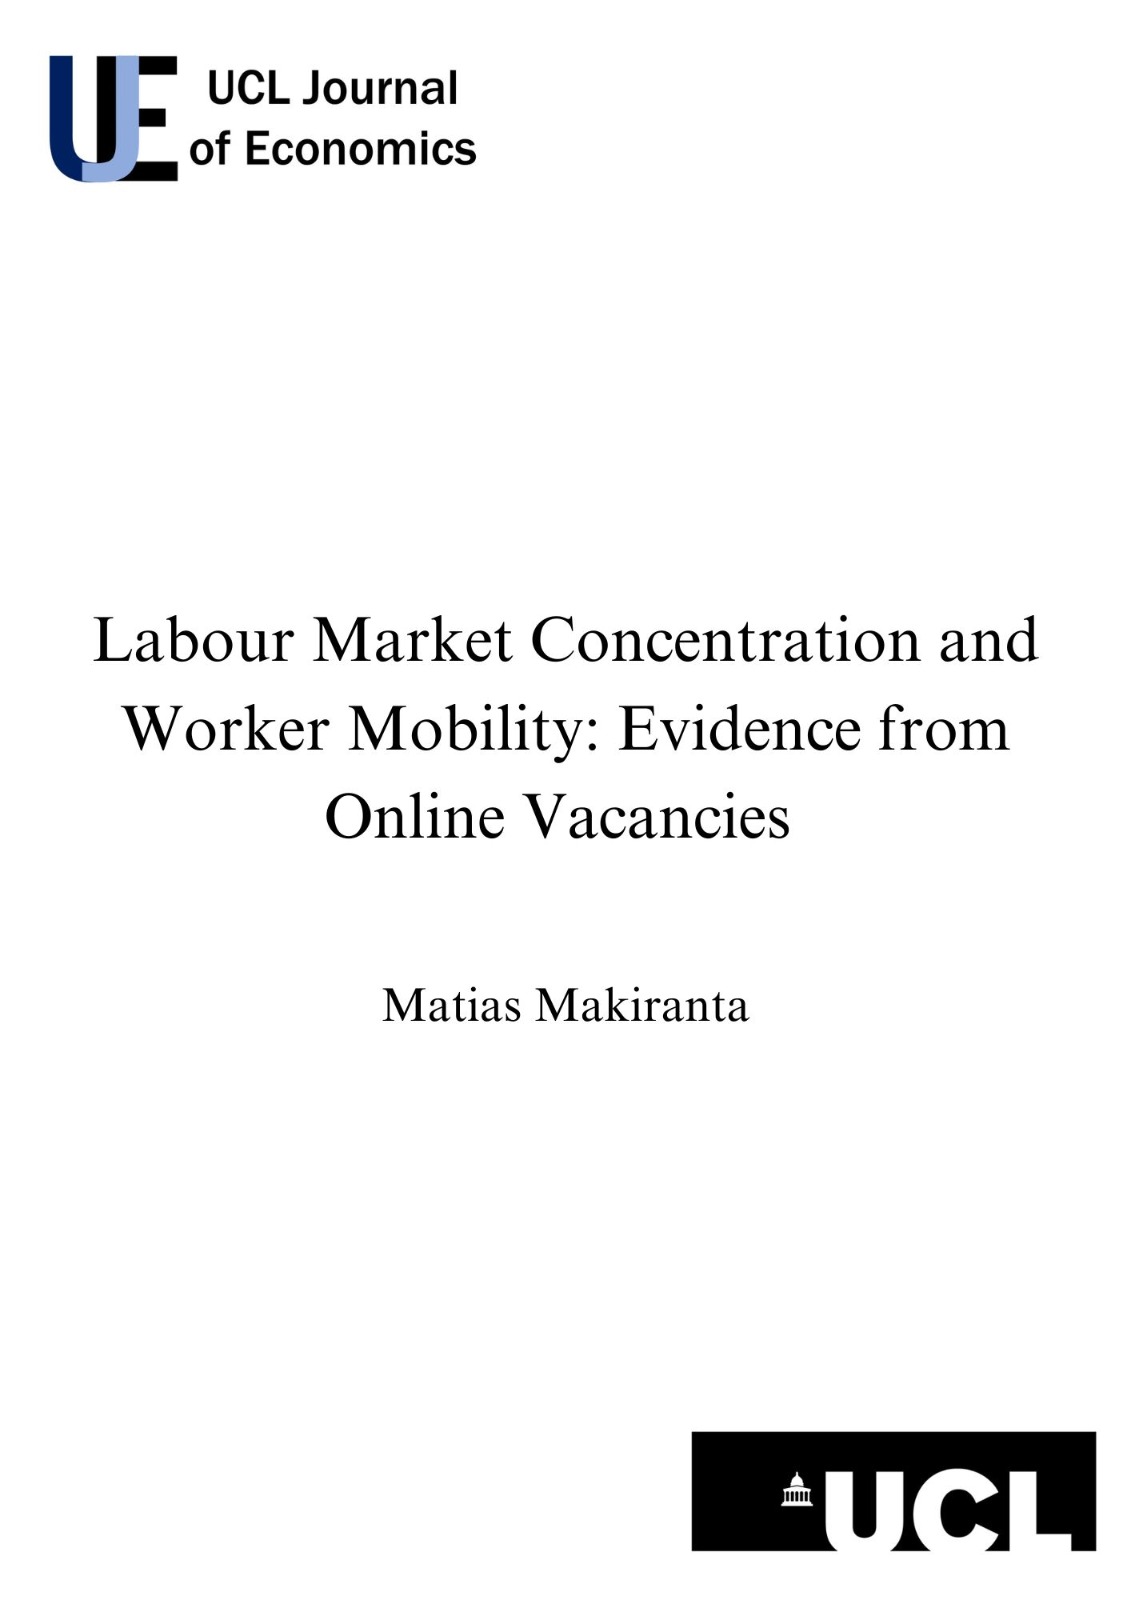 Labour Market Concentration and Worker Mobility: Evidence from Online Vacancies